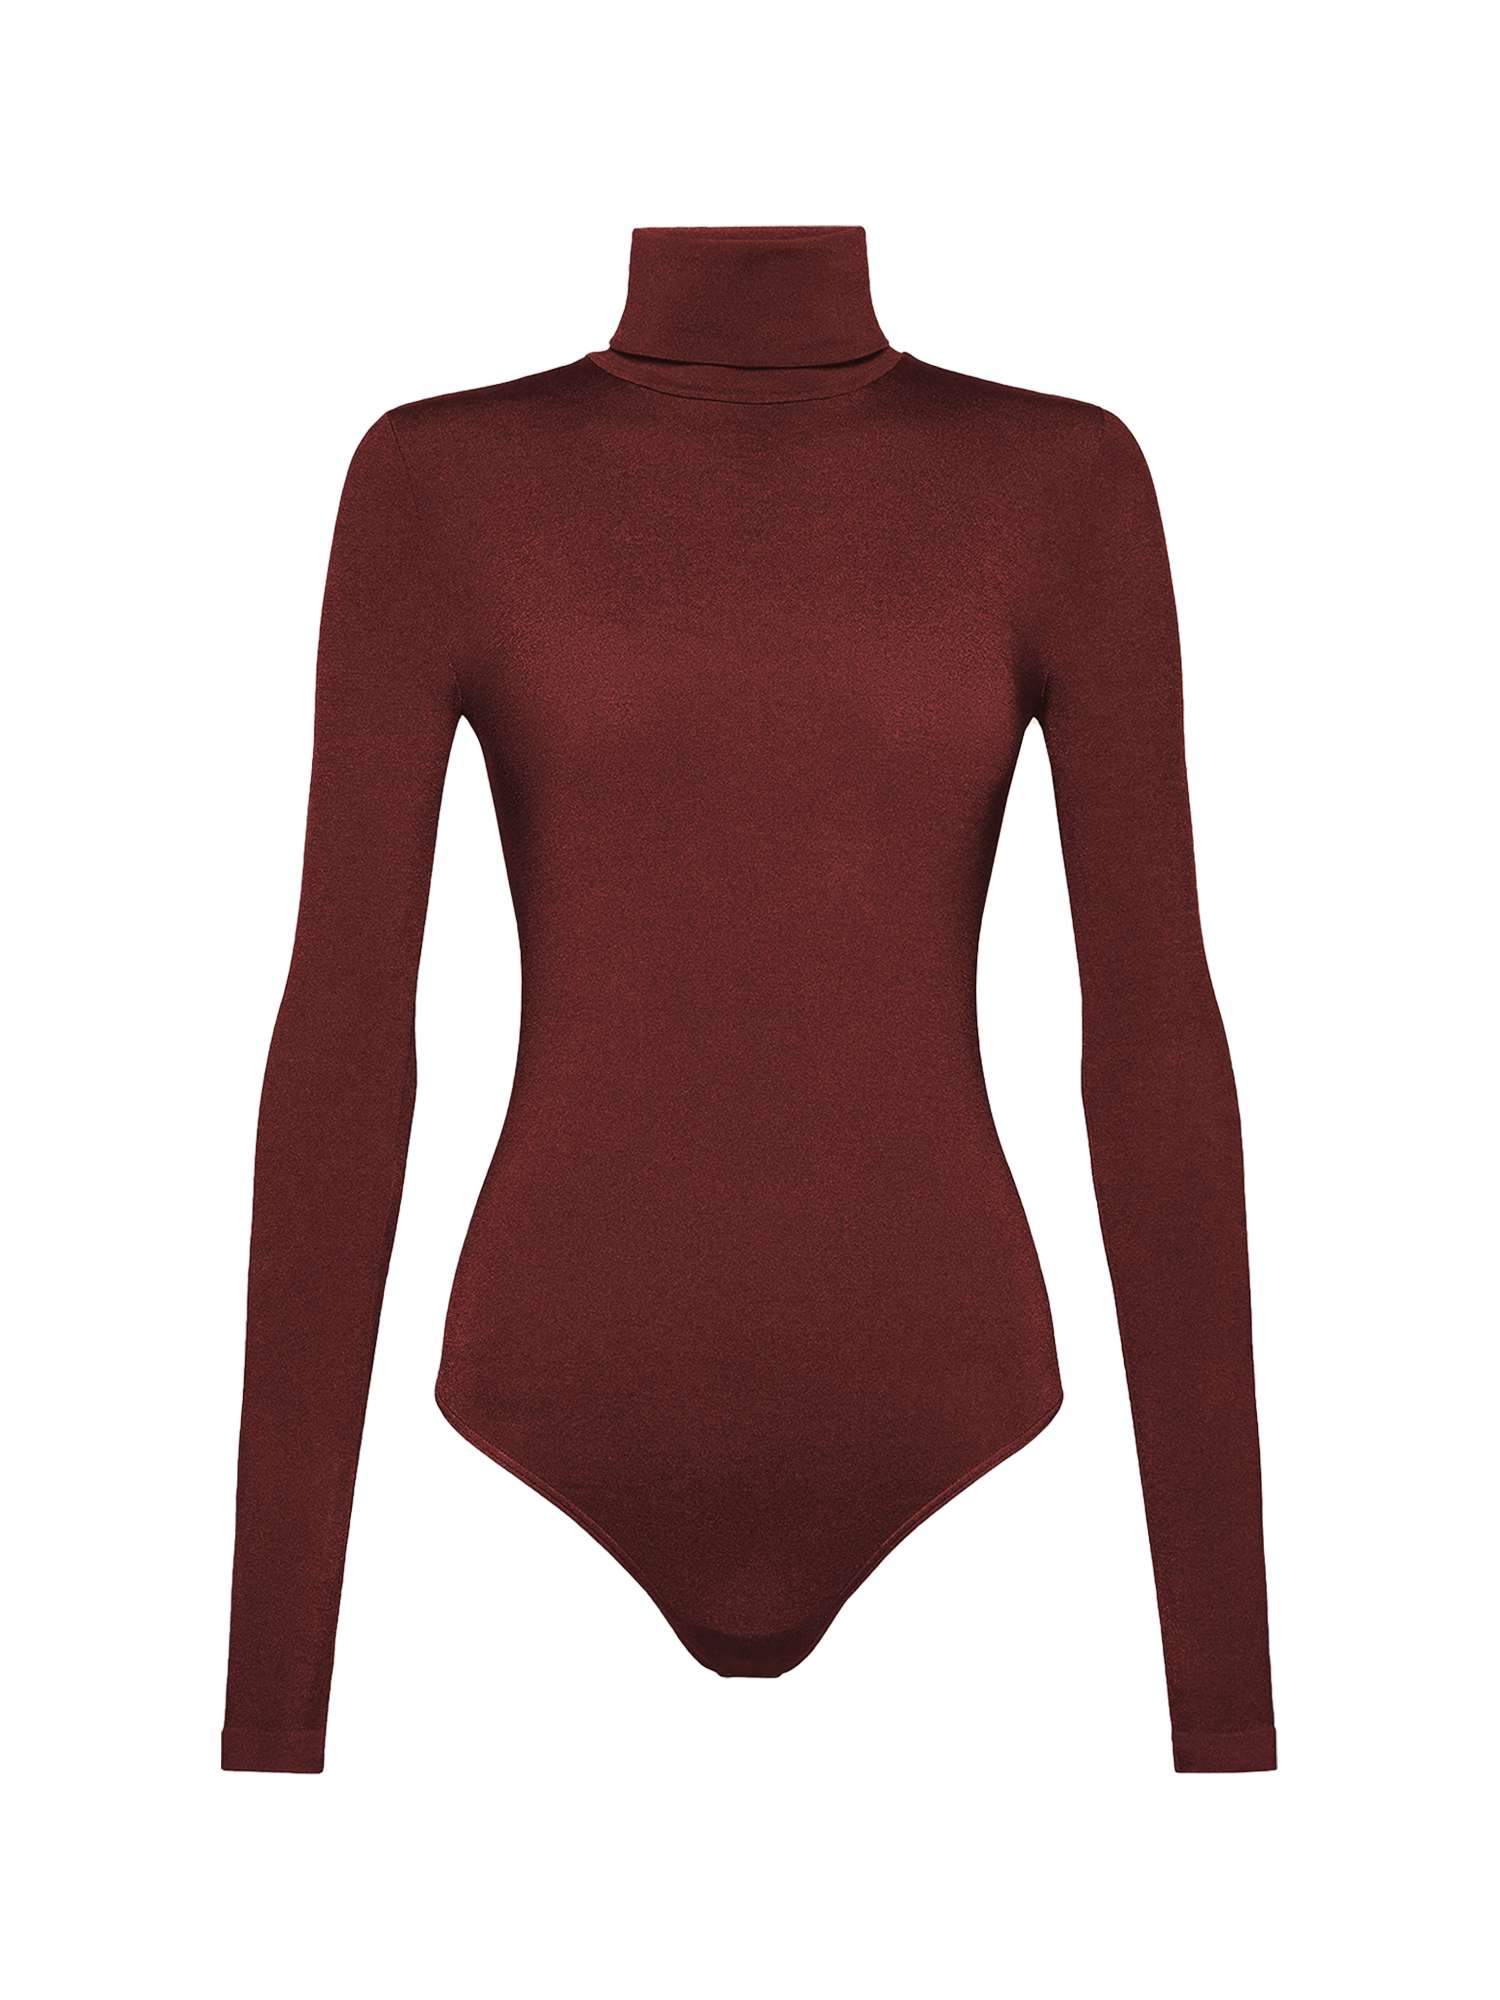 Wolford Tokio String Bodysuit @ Carriage Trade Shop in the Kingsway,  Toronto Canada